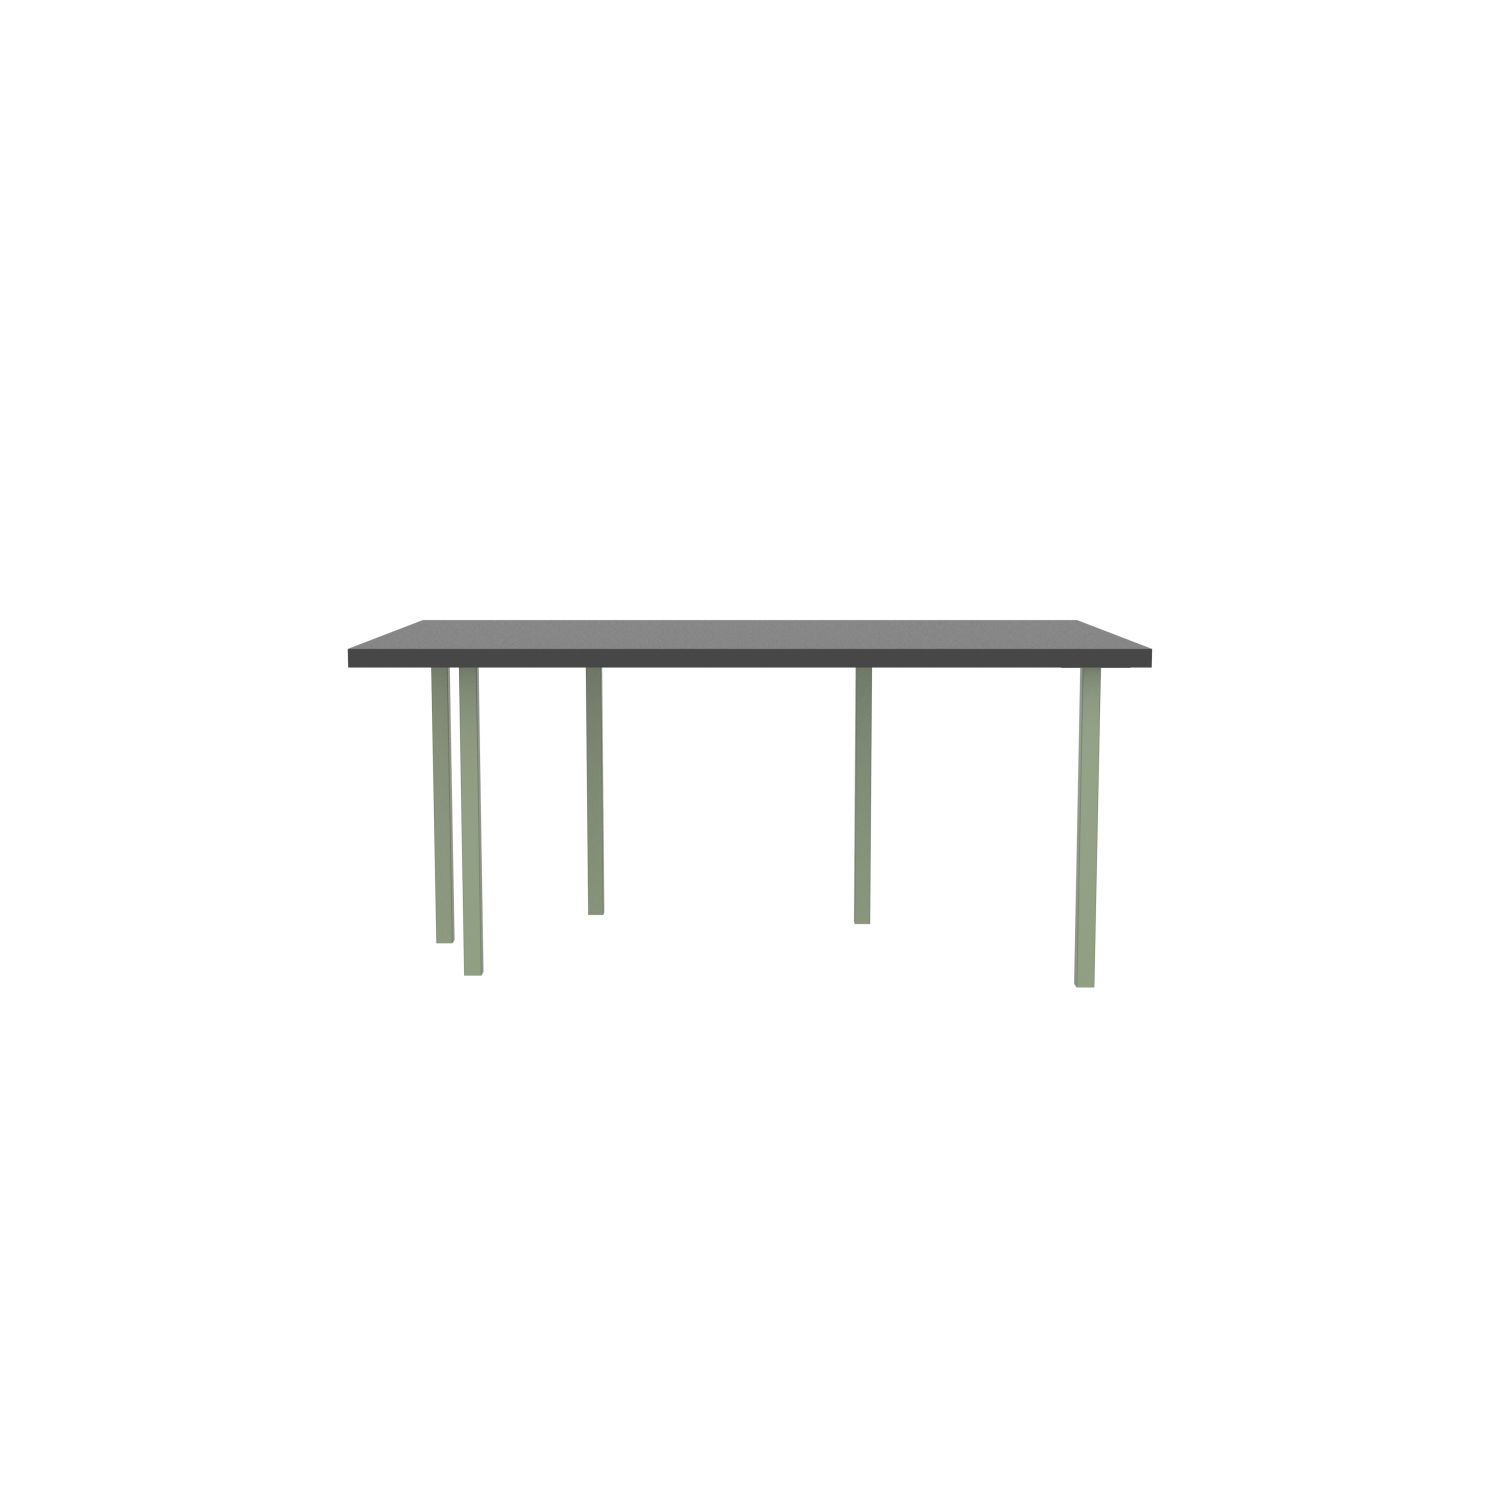 lensvelt bbrand table five fixed heigt 103x172 hpl black 50 mm price level 1 green ral6021